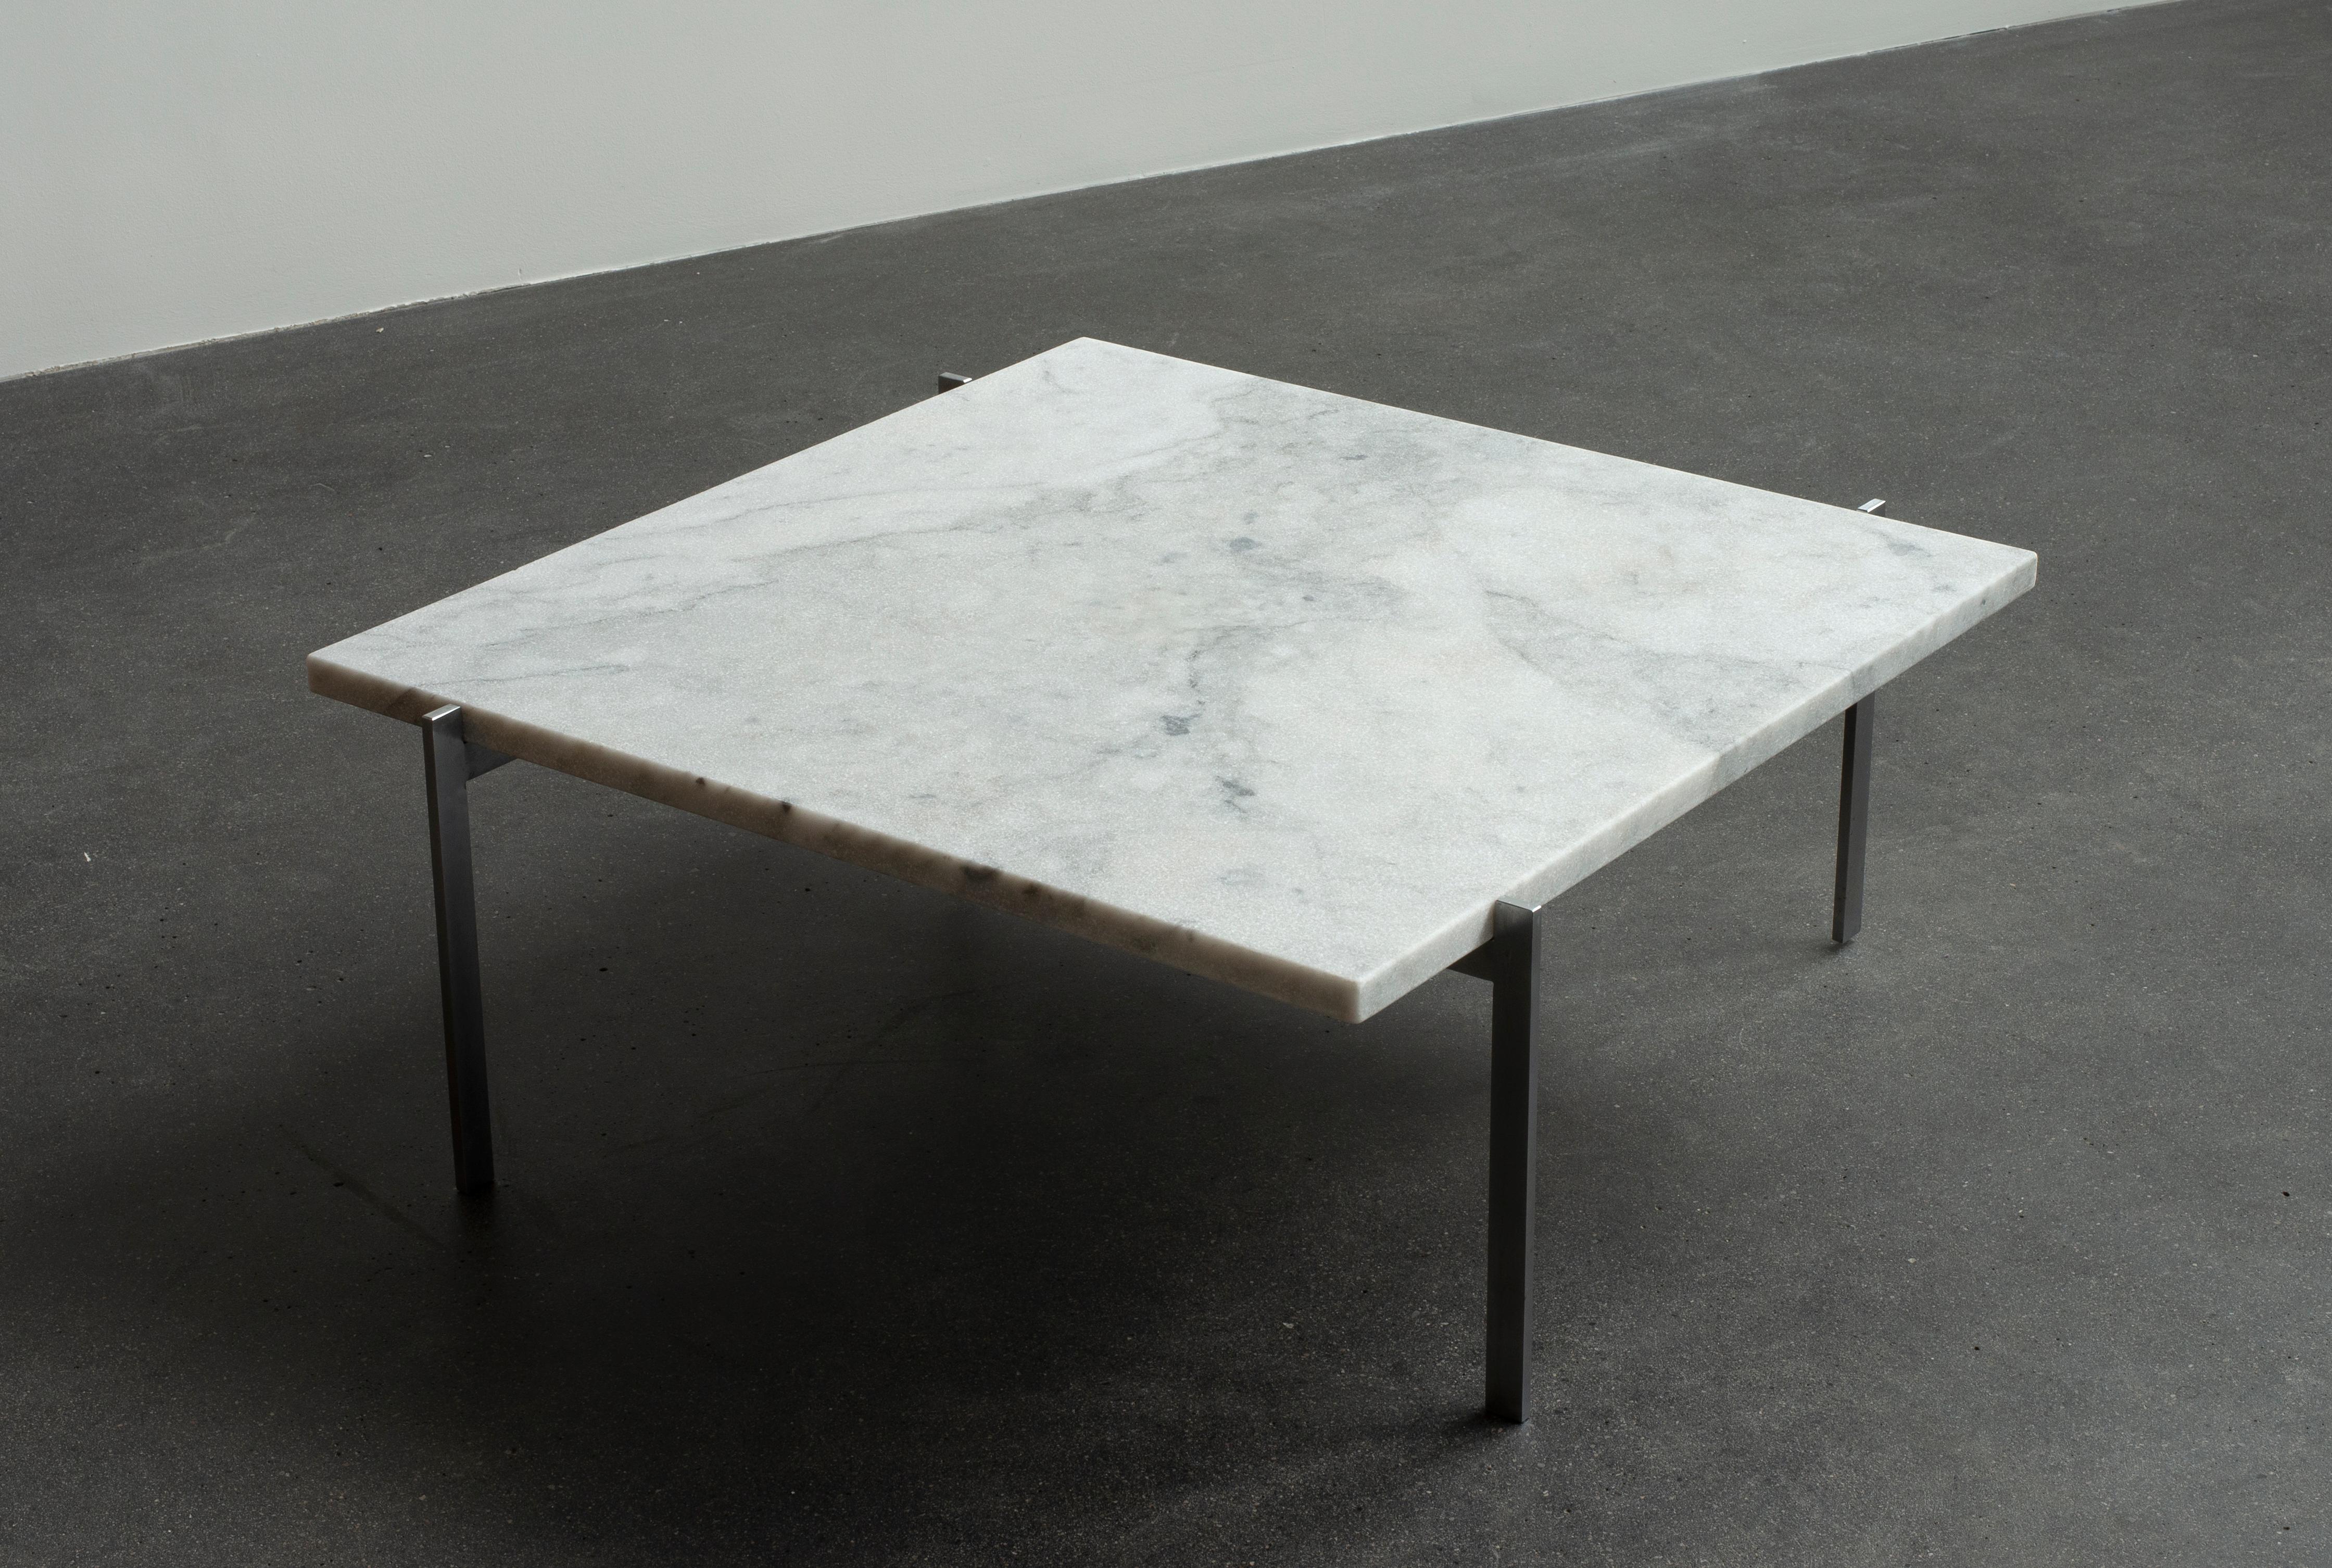 Poul Kjaerholm coffee table PK61. Executed by Fritz Hansen, Denmark.

Dull chromium plated steel and top of flint-rolled marble. Marked Fritz Hansen 1984.